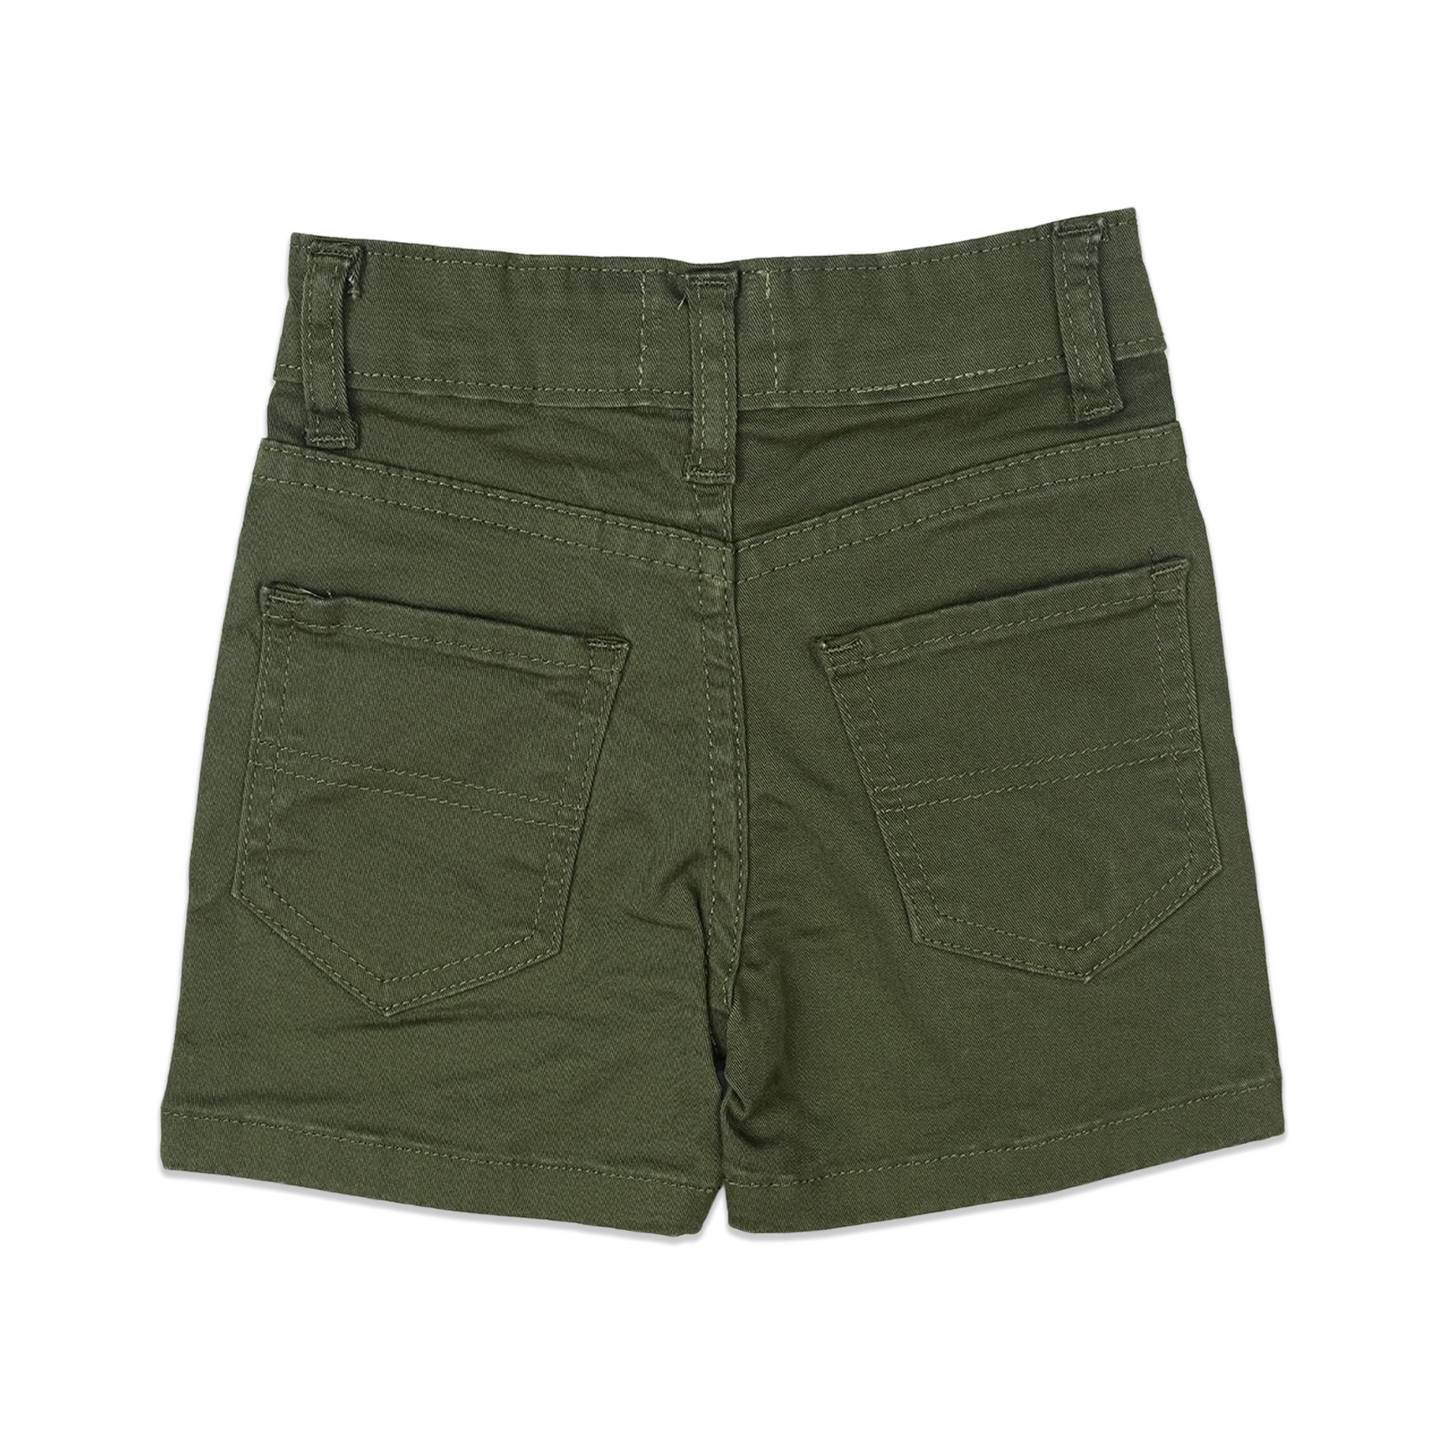 Green Colored Shorts for boys - Miniwears